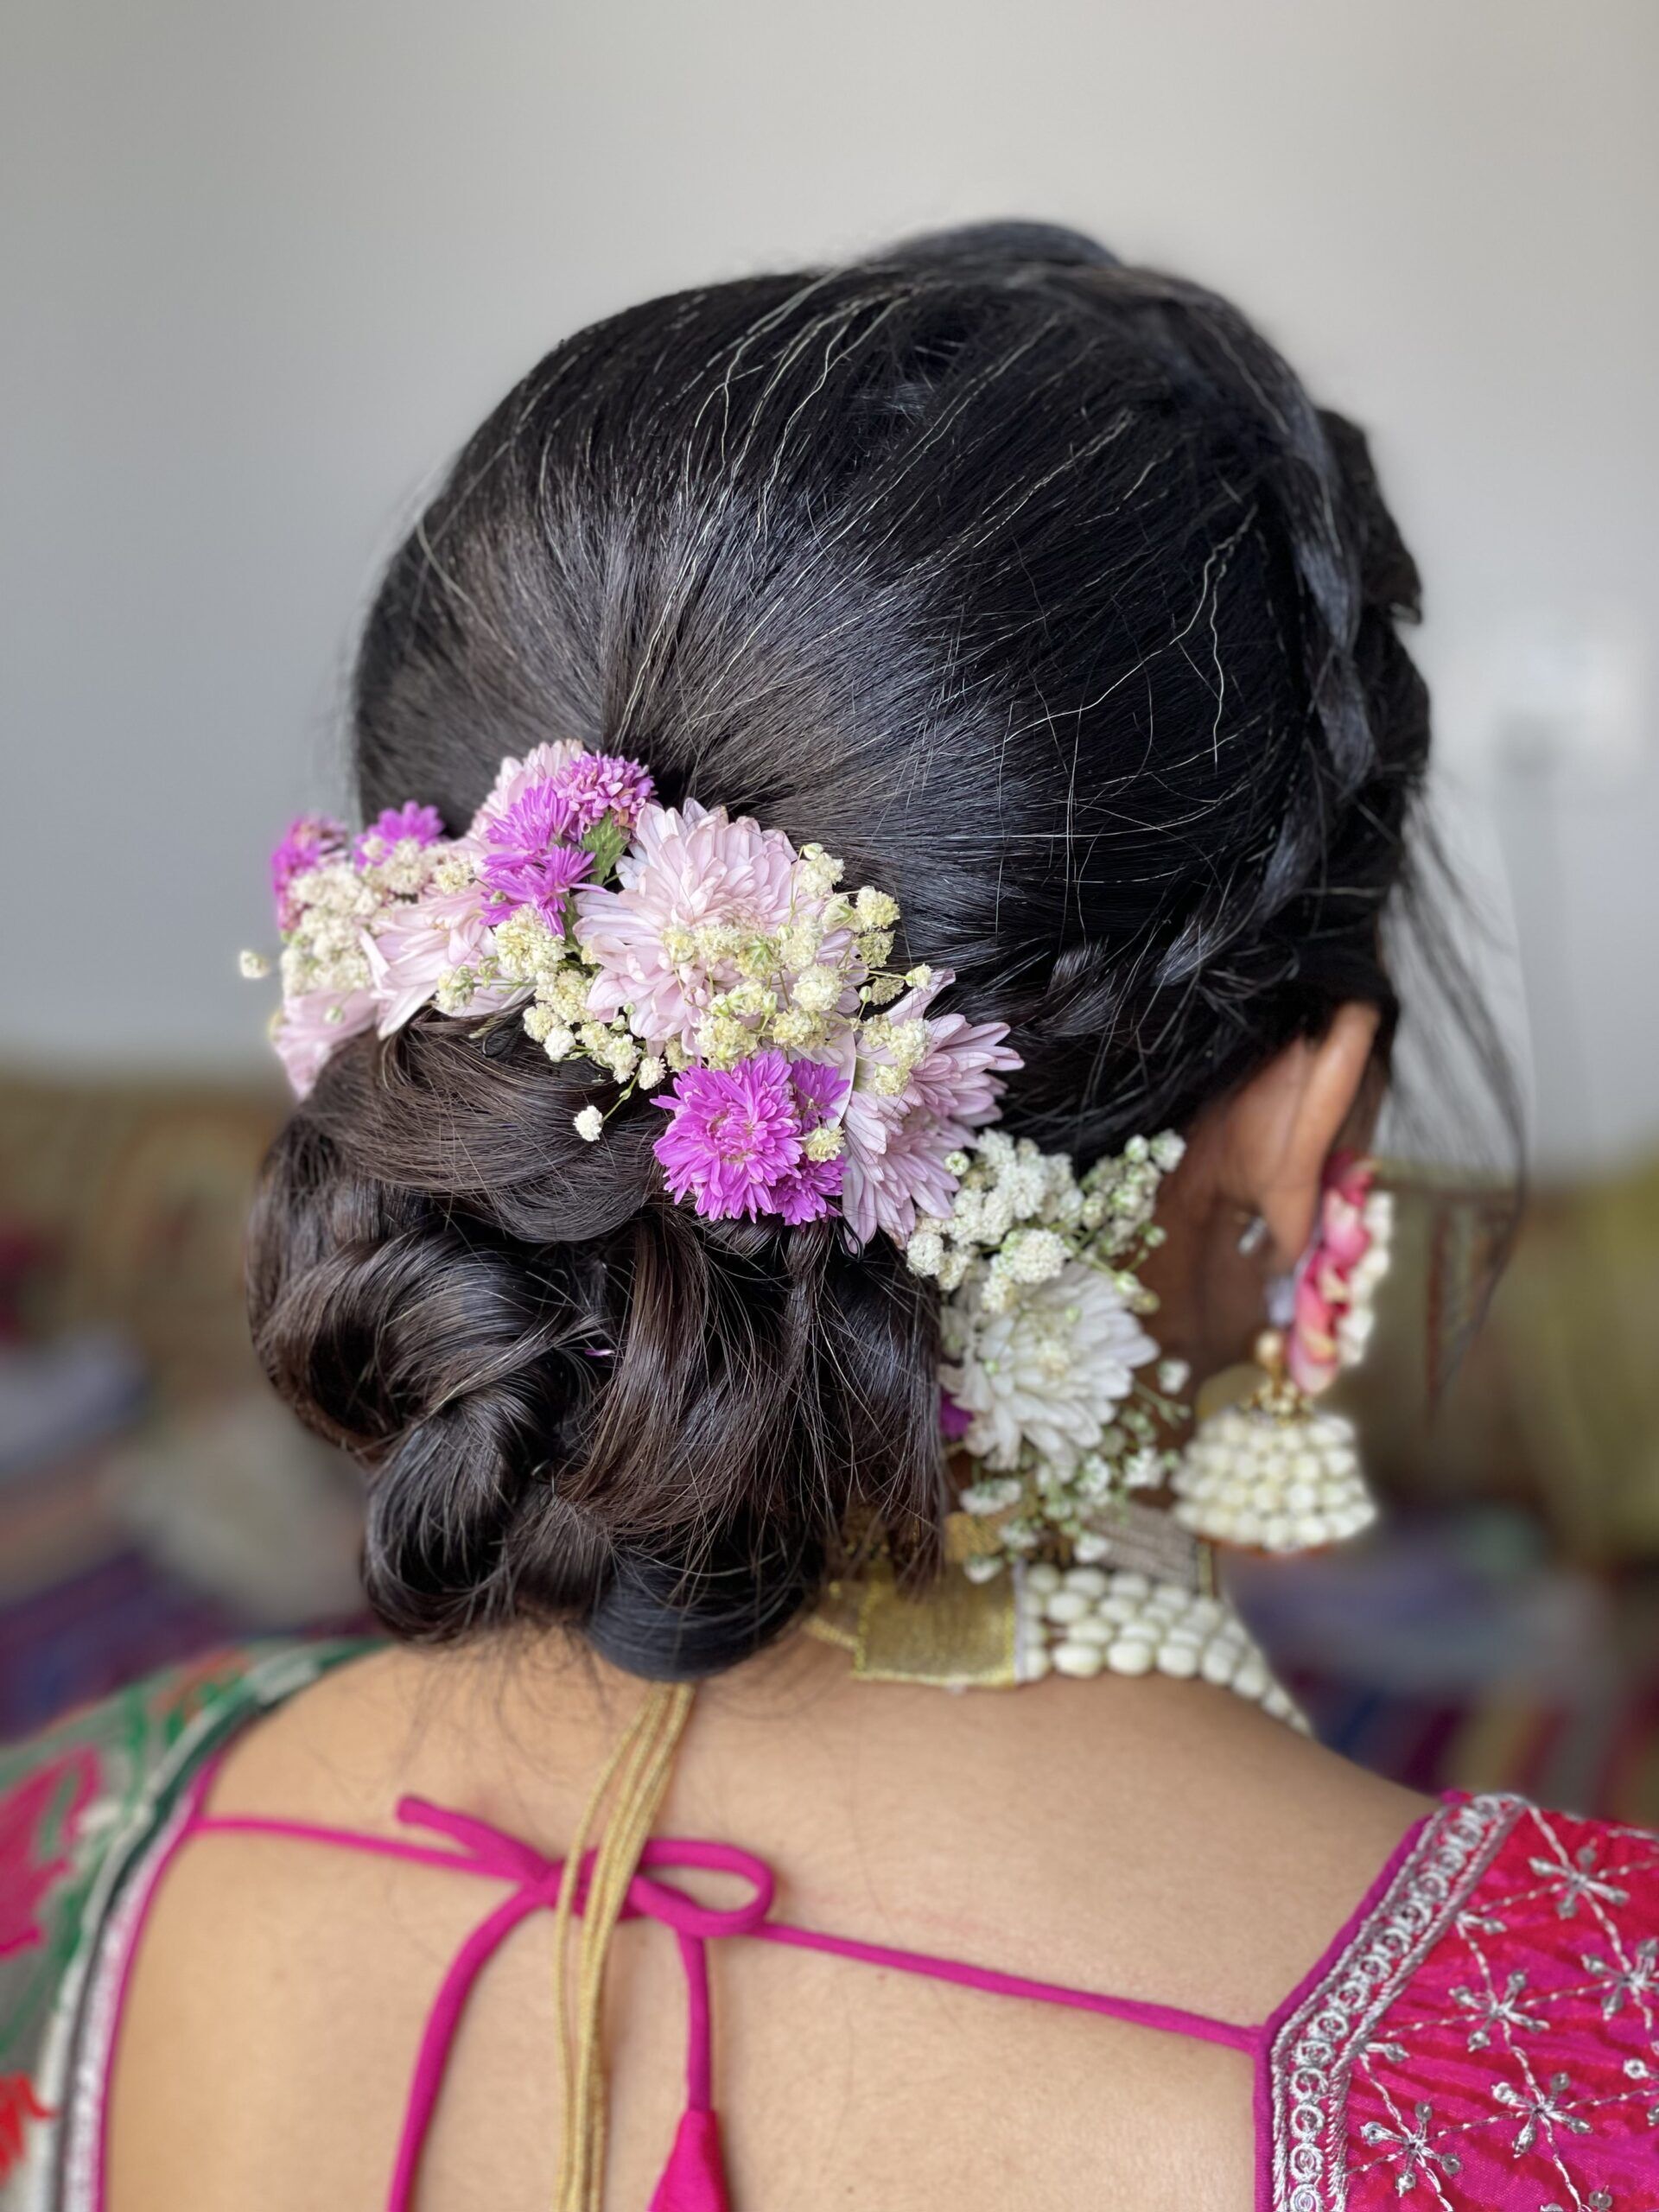 Engagement & Baby Shower Hairstyles I did for my Brides in this 2020💕  #𝑇ℎ𝑒𝑄𝑢𝑒𝑒𝑛𝐵𝑒𝑒𝑧𝐵𝑟𝑖𝑑𝑒 Due to this pandemic, we all have been  staying at home with no... | By QueenBeezFacebook